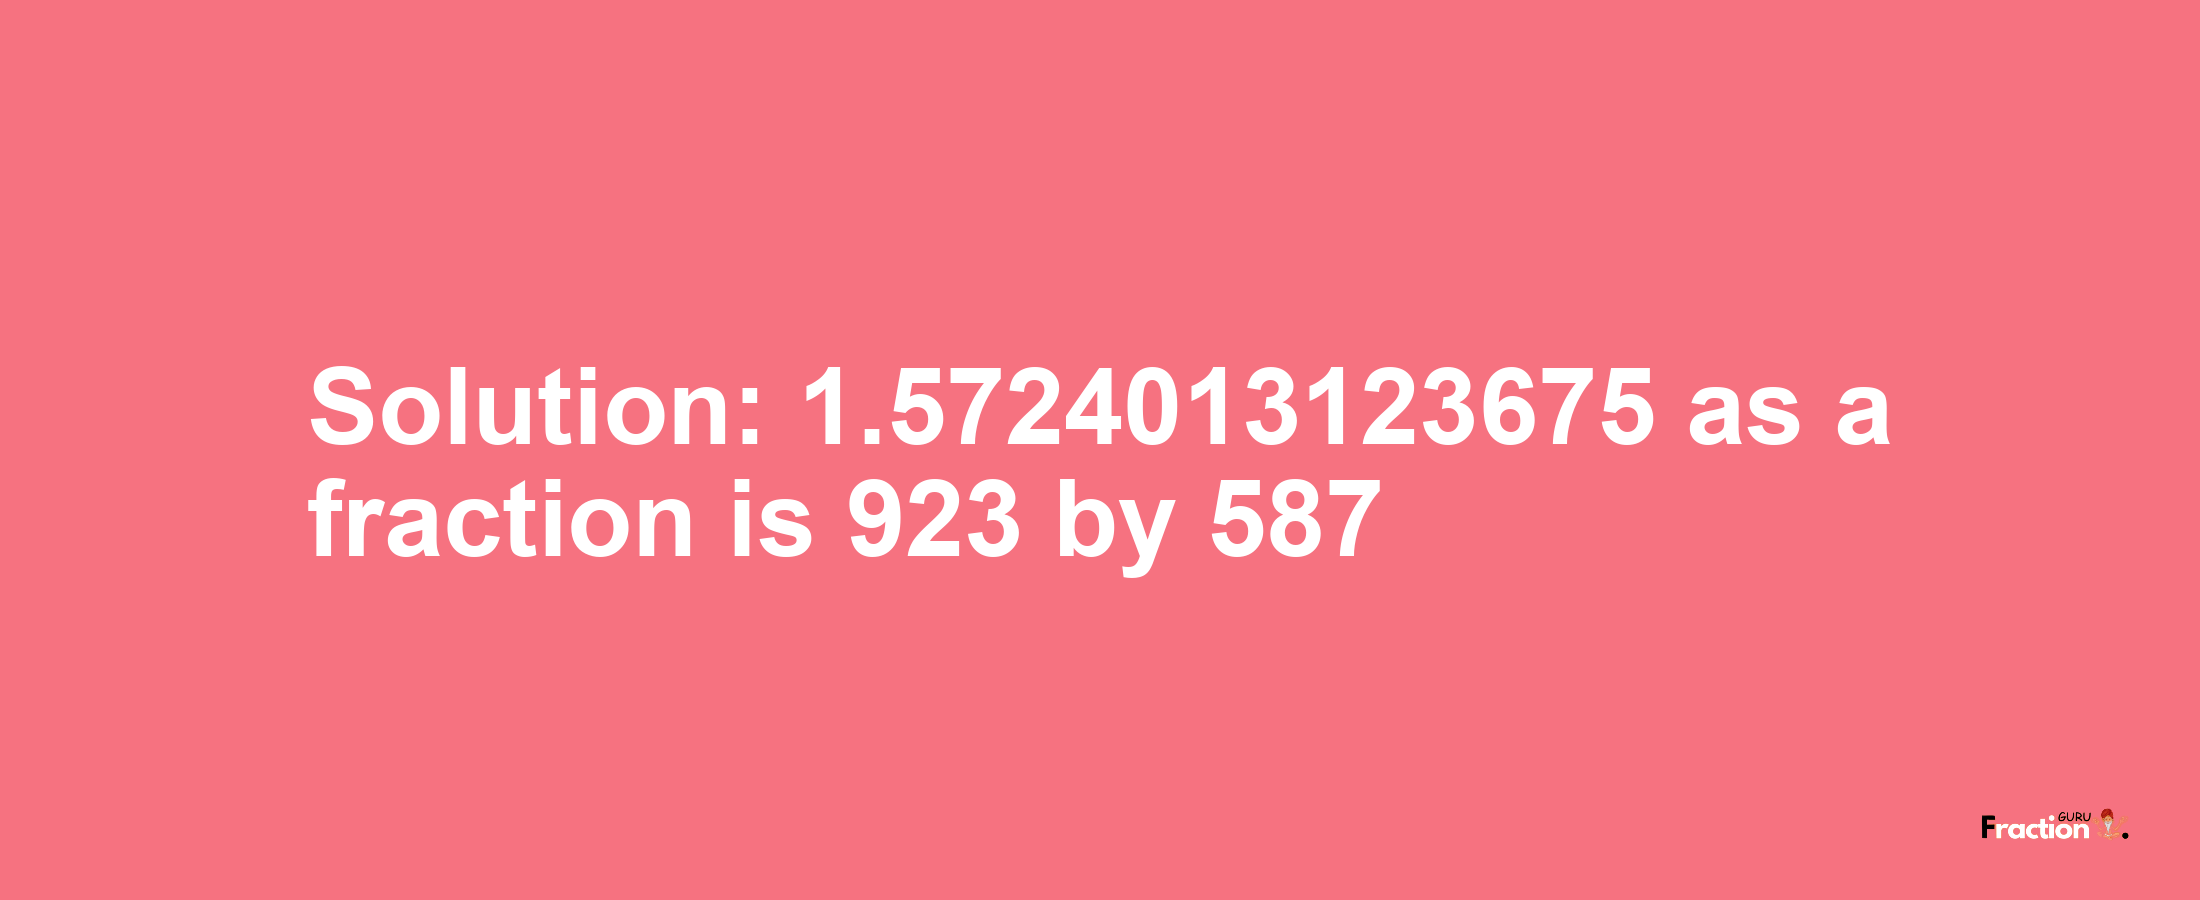 Solution:1.5724013123675 as a fraction is 923/587